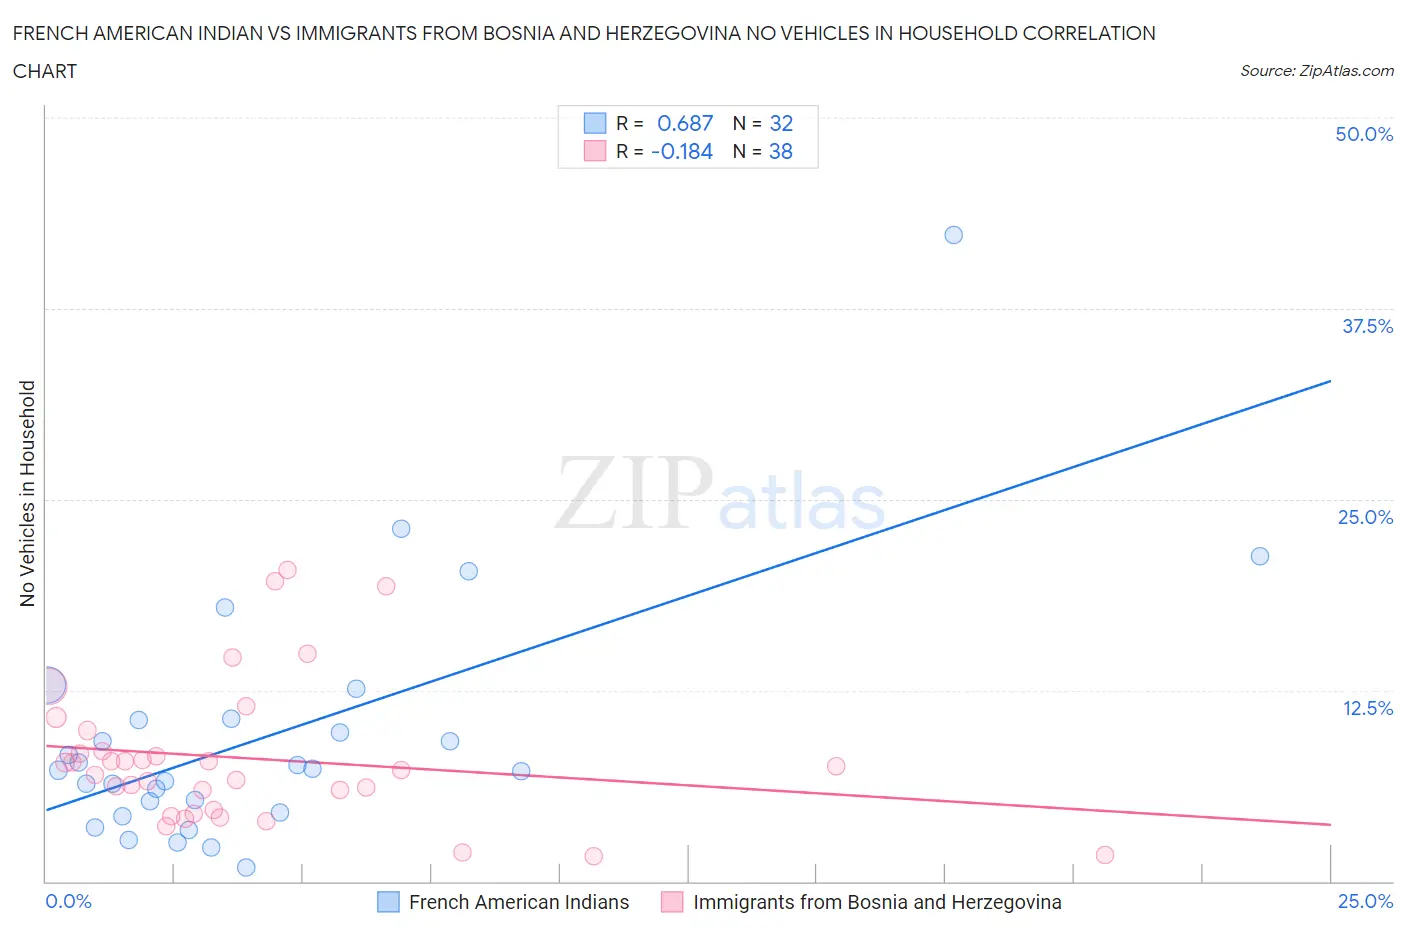 French American Indian vs Immigrants from Bosnia and Herzegovina No Vehicles in Household